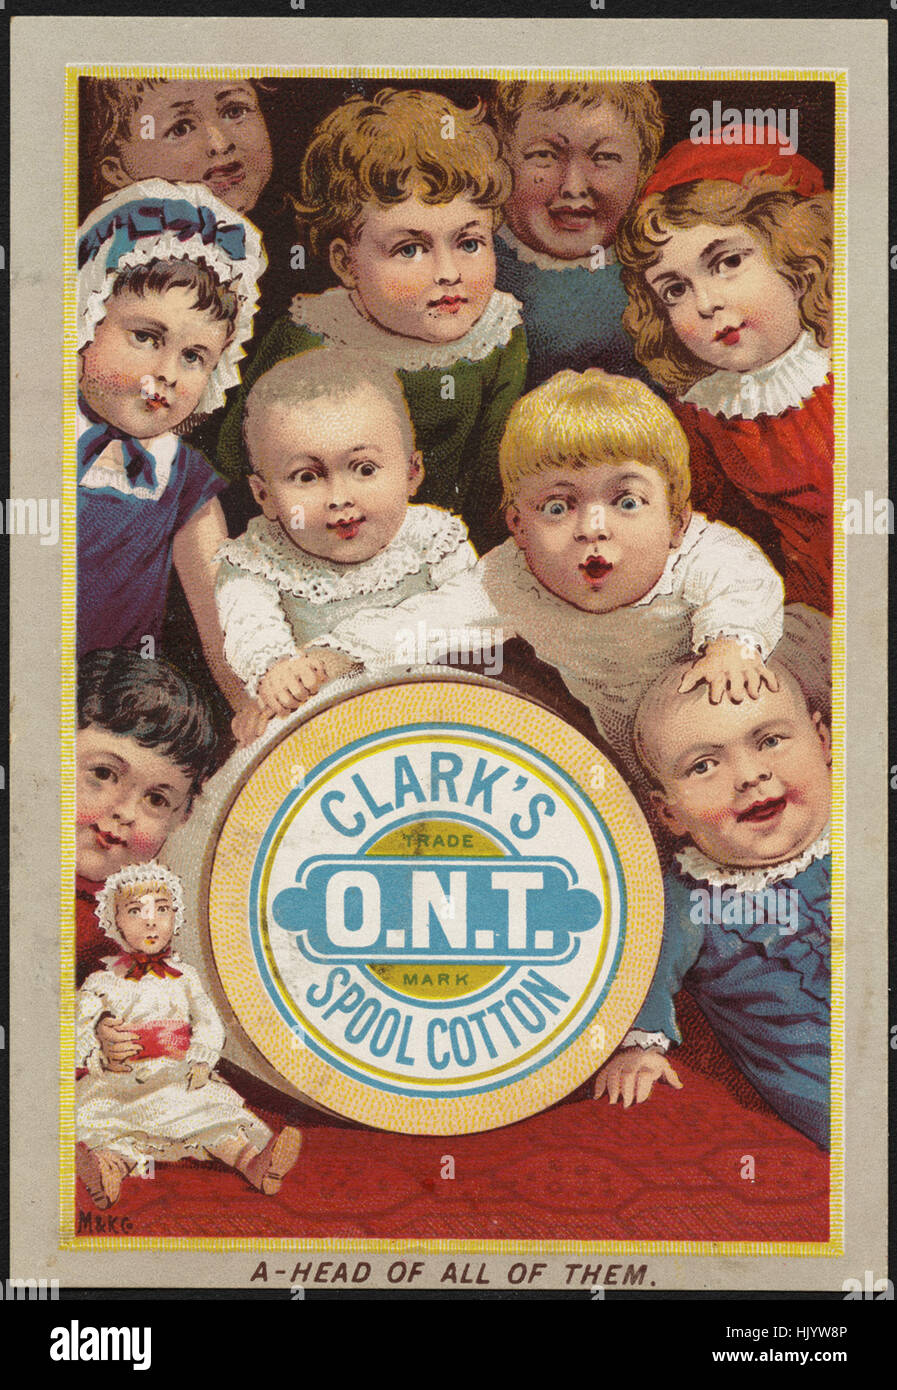 Clark's O.N.T. Spool Cotton, a-head of all of them. Stock Photo